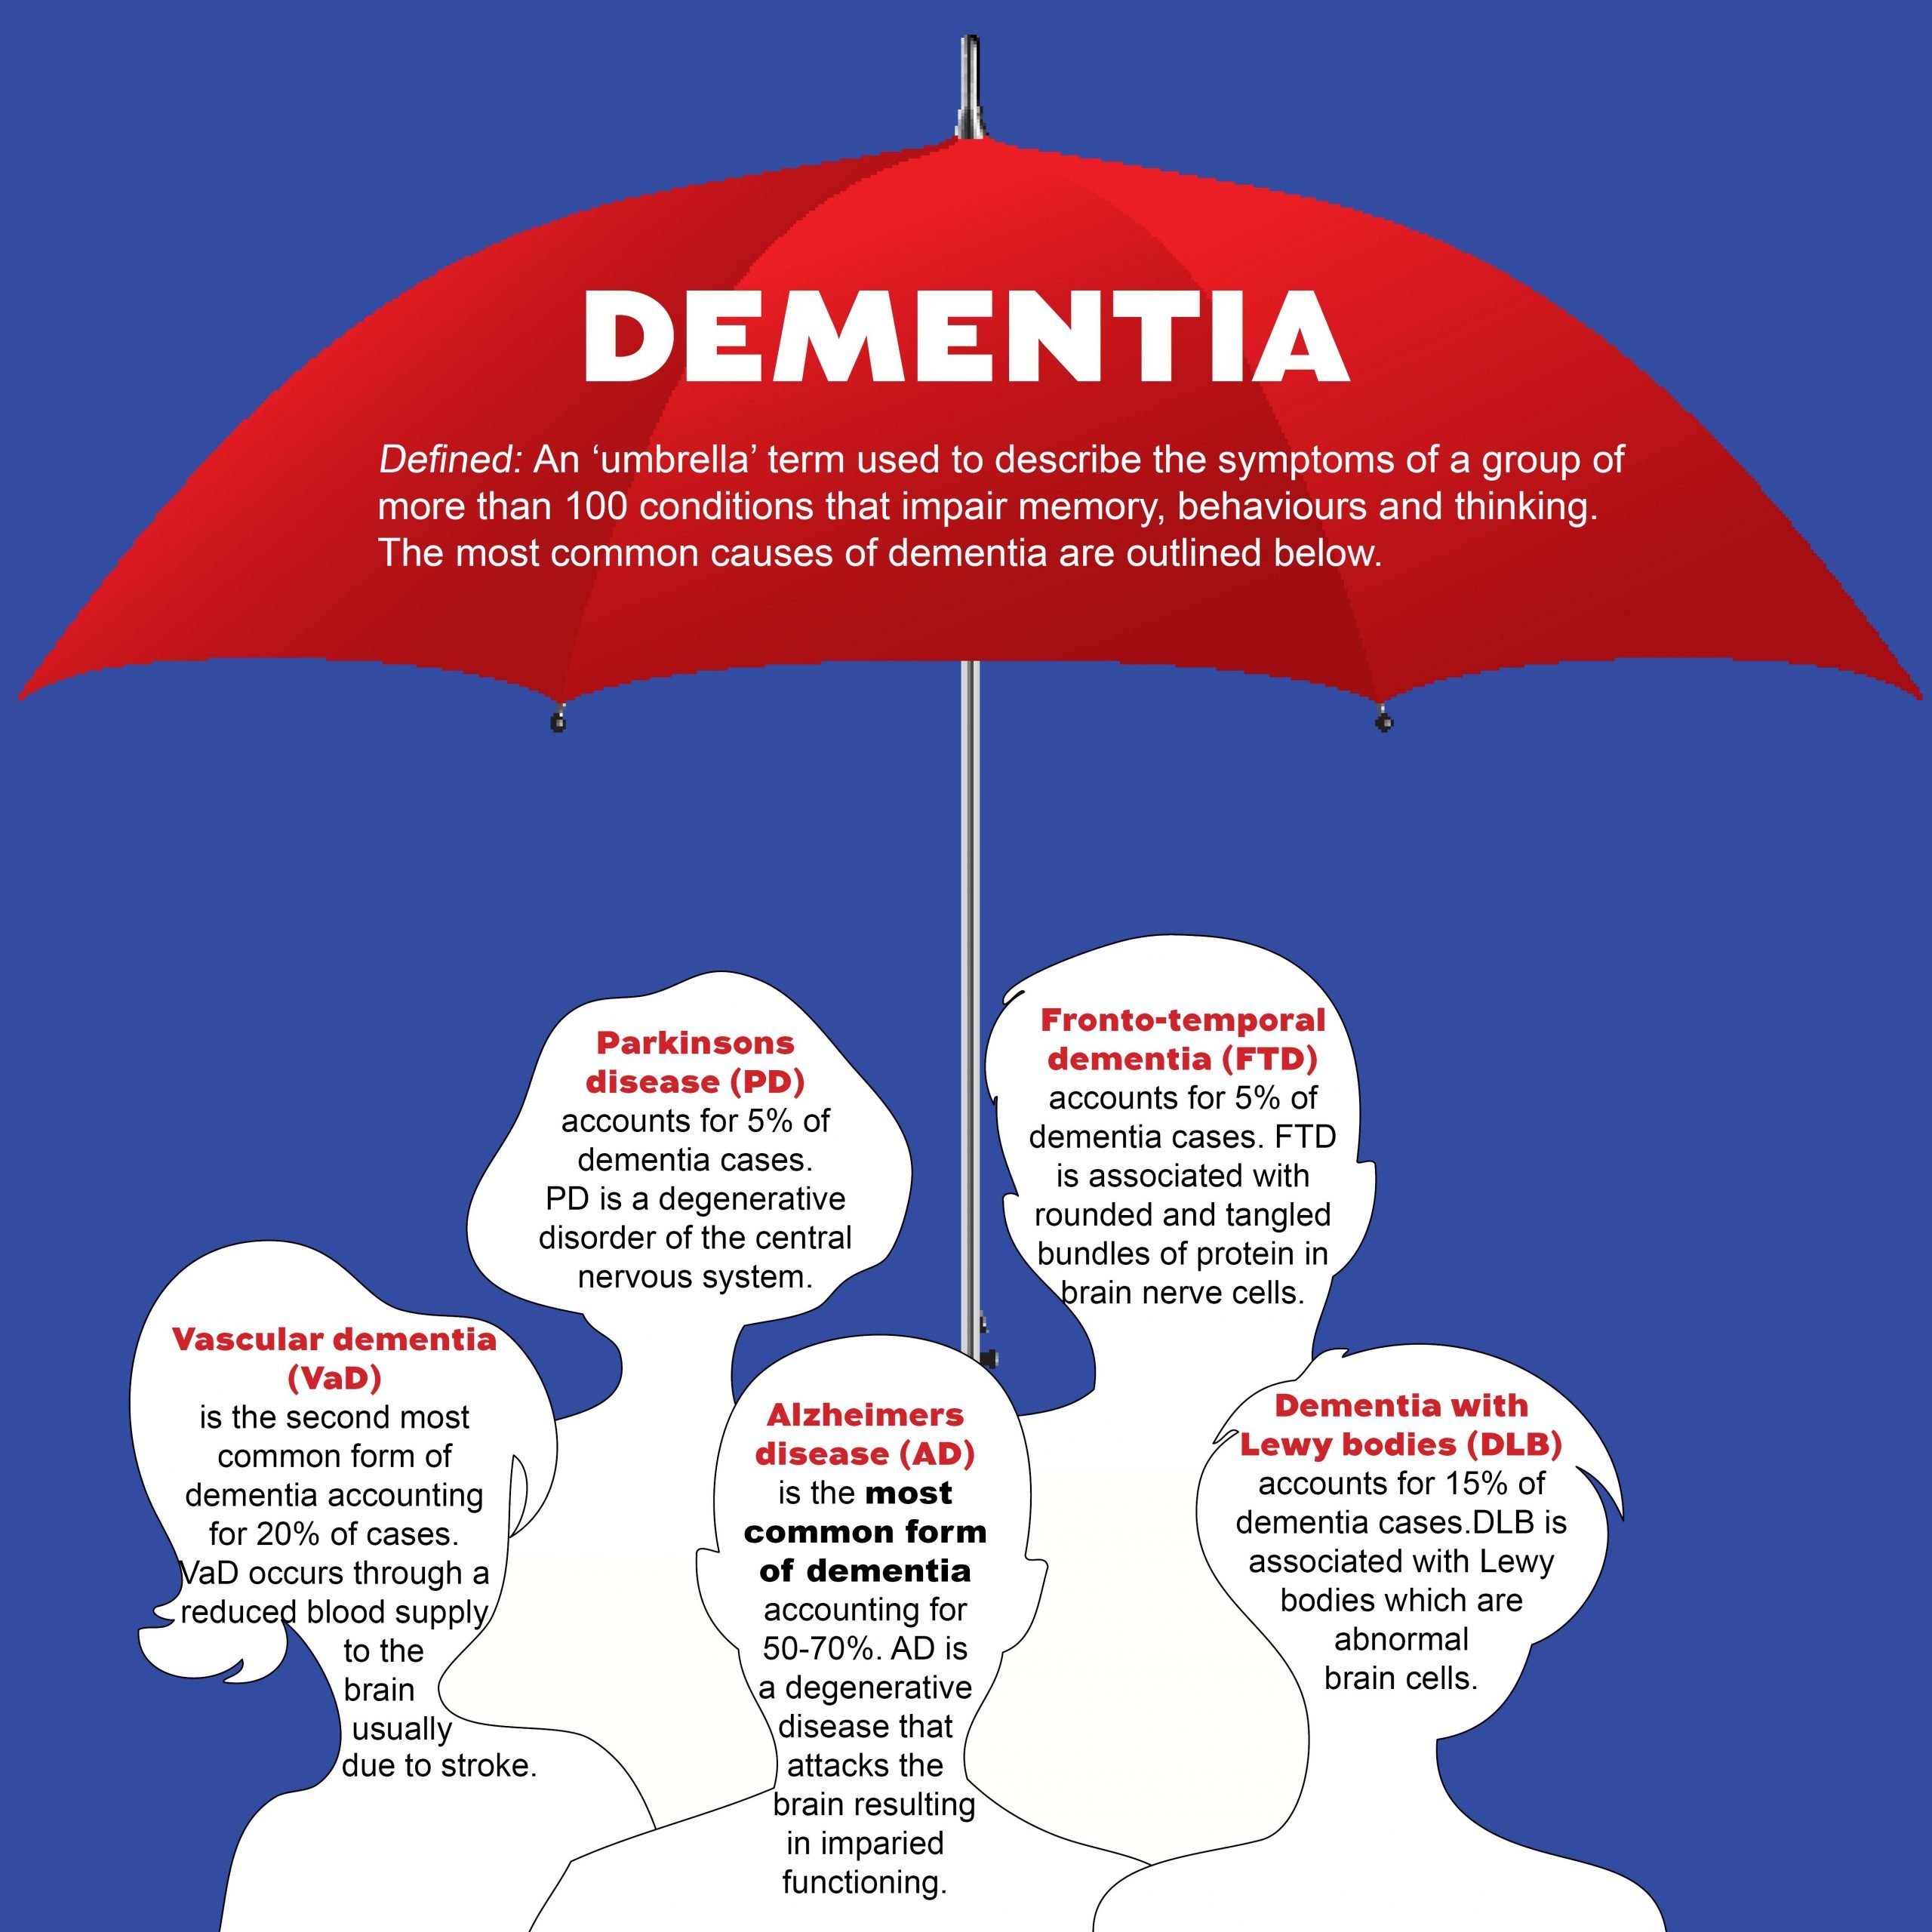 This infographic promotes the understanding of dementia ...